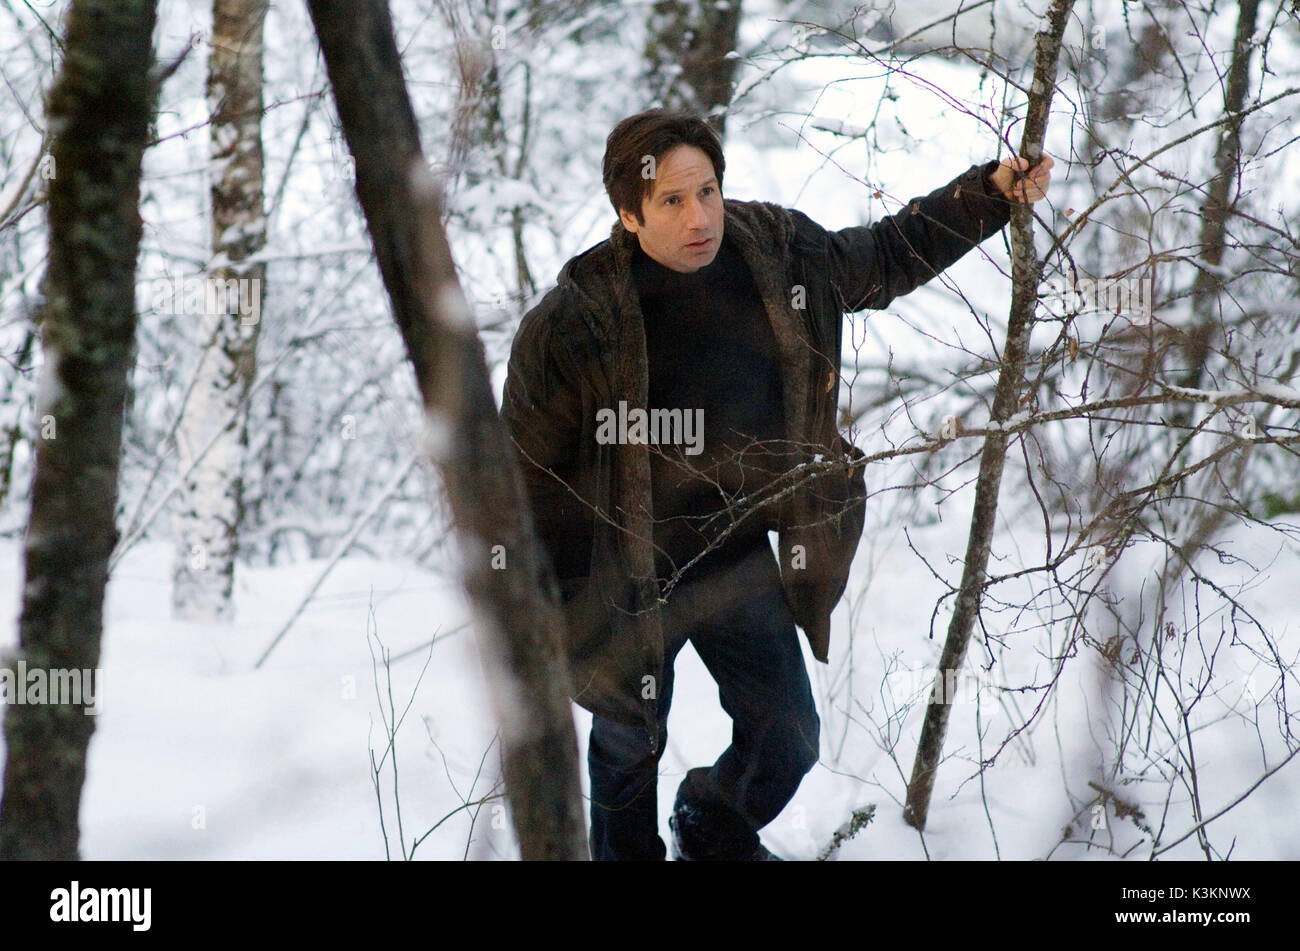 THE X FILES: I WANT TO BELIEVE  DAVID DUCHOVNY as Fox Mulder       Date: 2008 Stock Photo